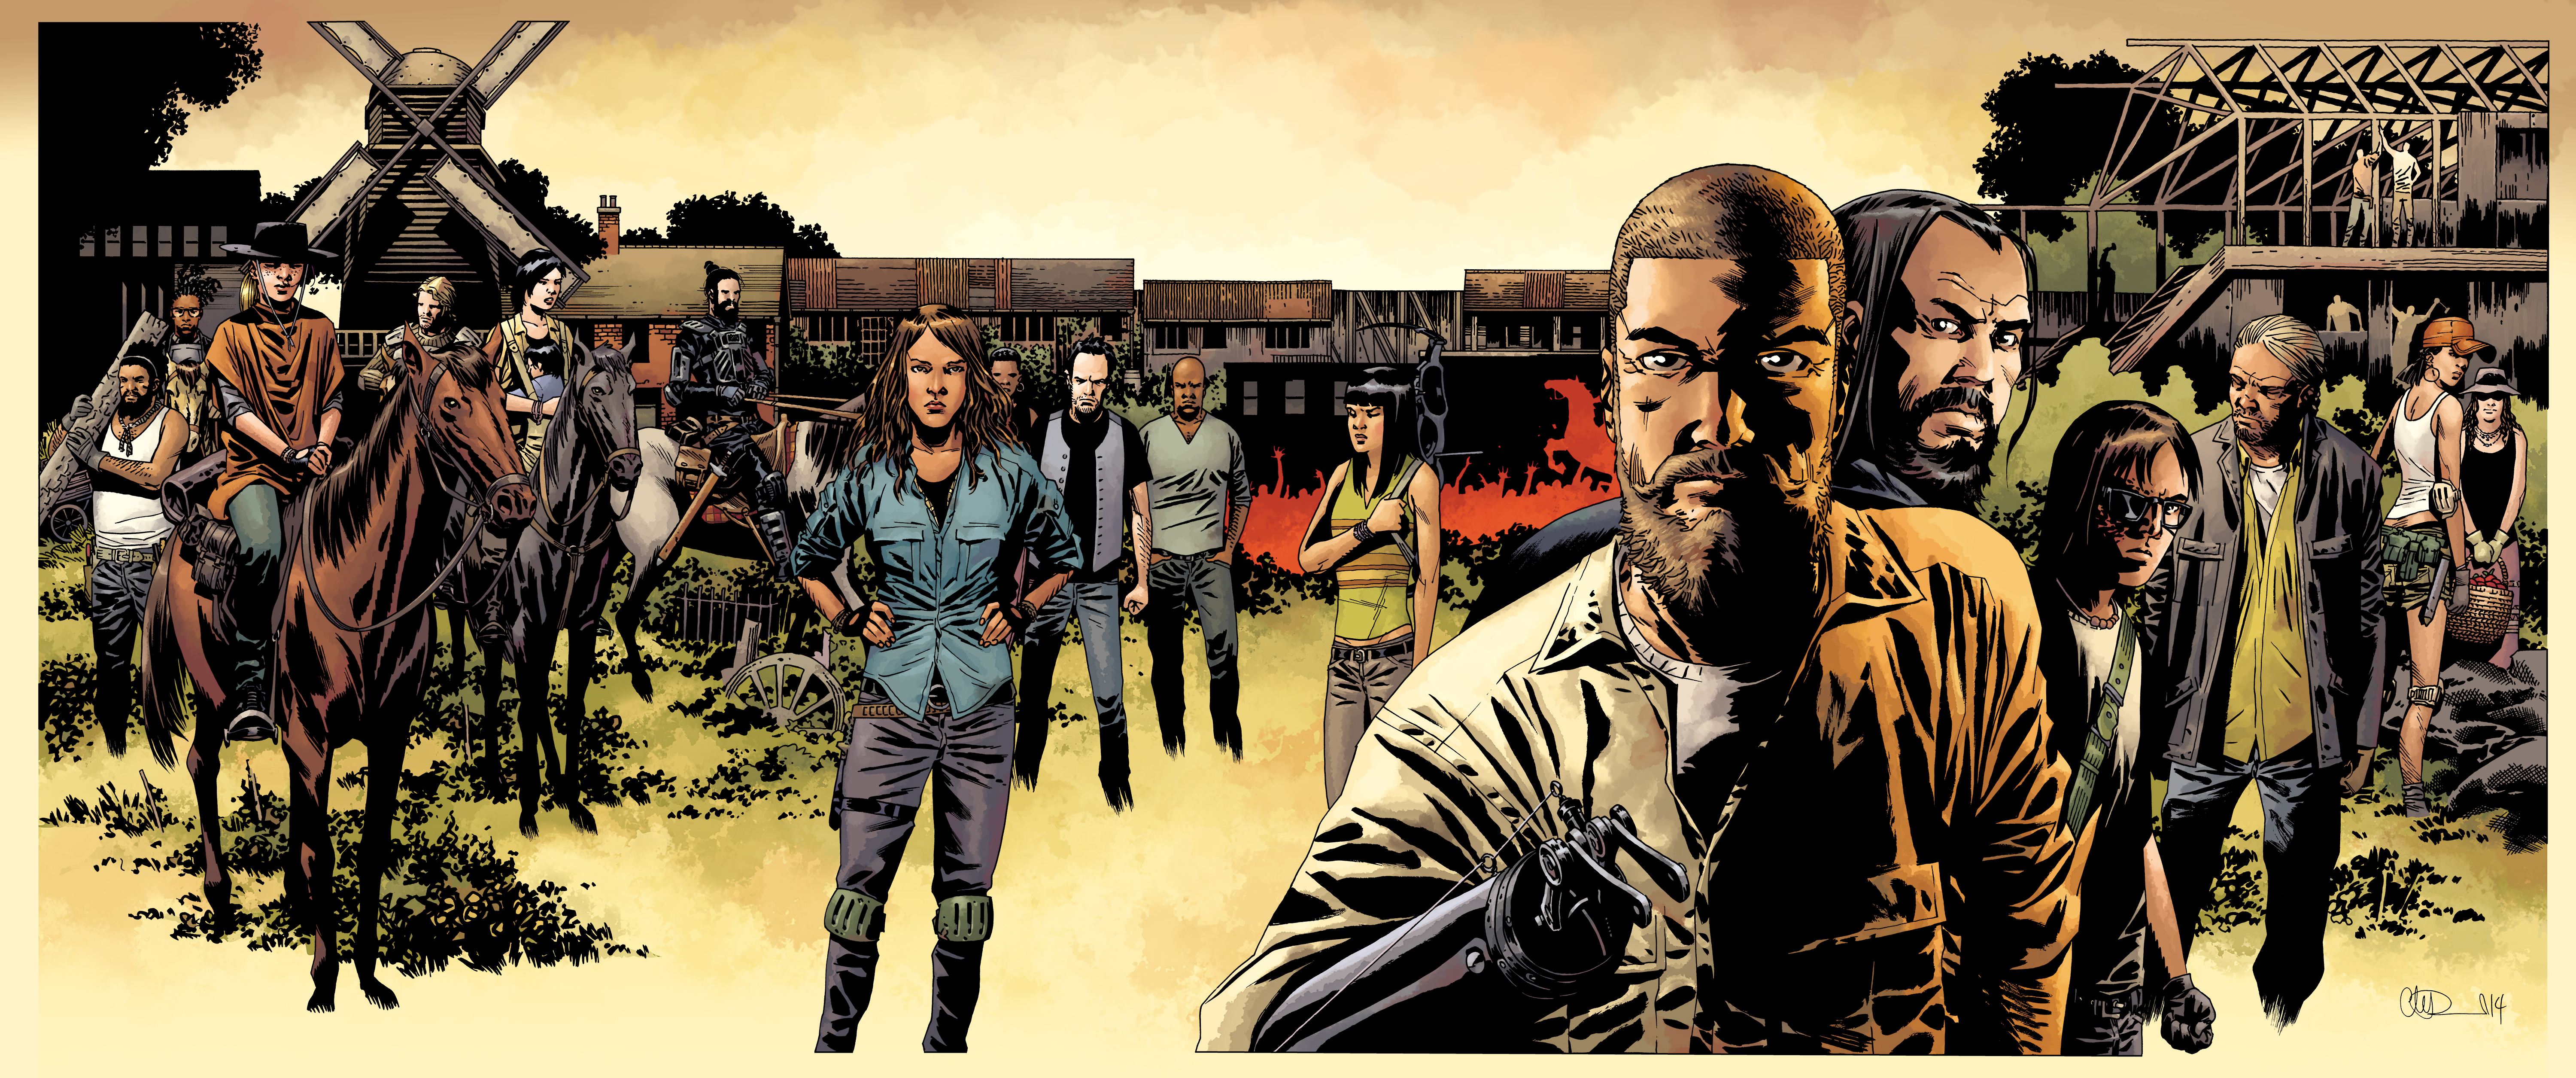 the walking dead comic wallpaper,action adventure game,movie,art,photography,shooter game